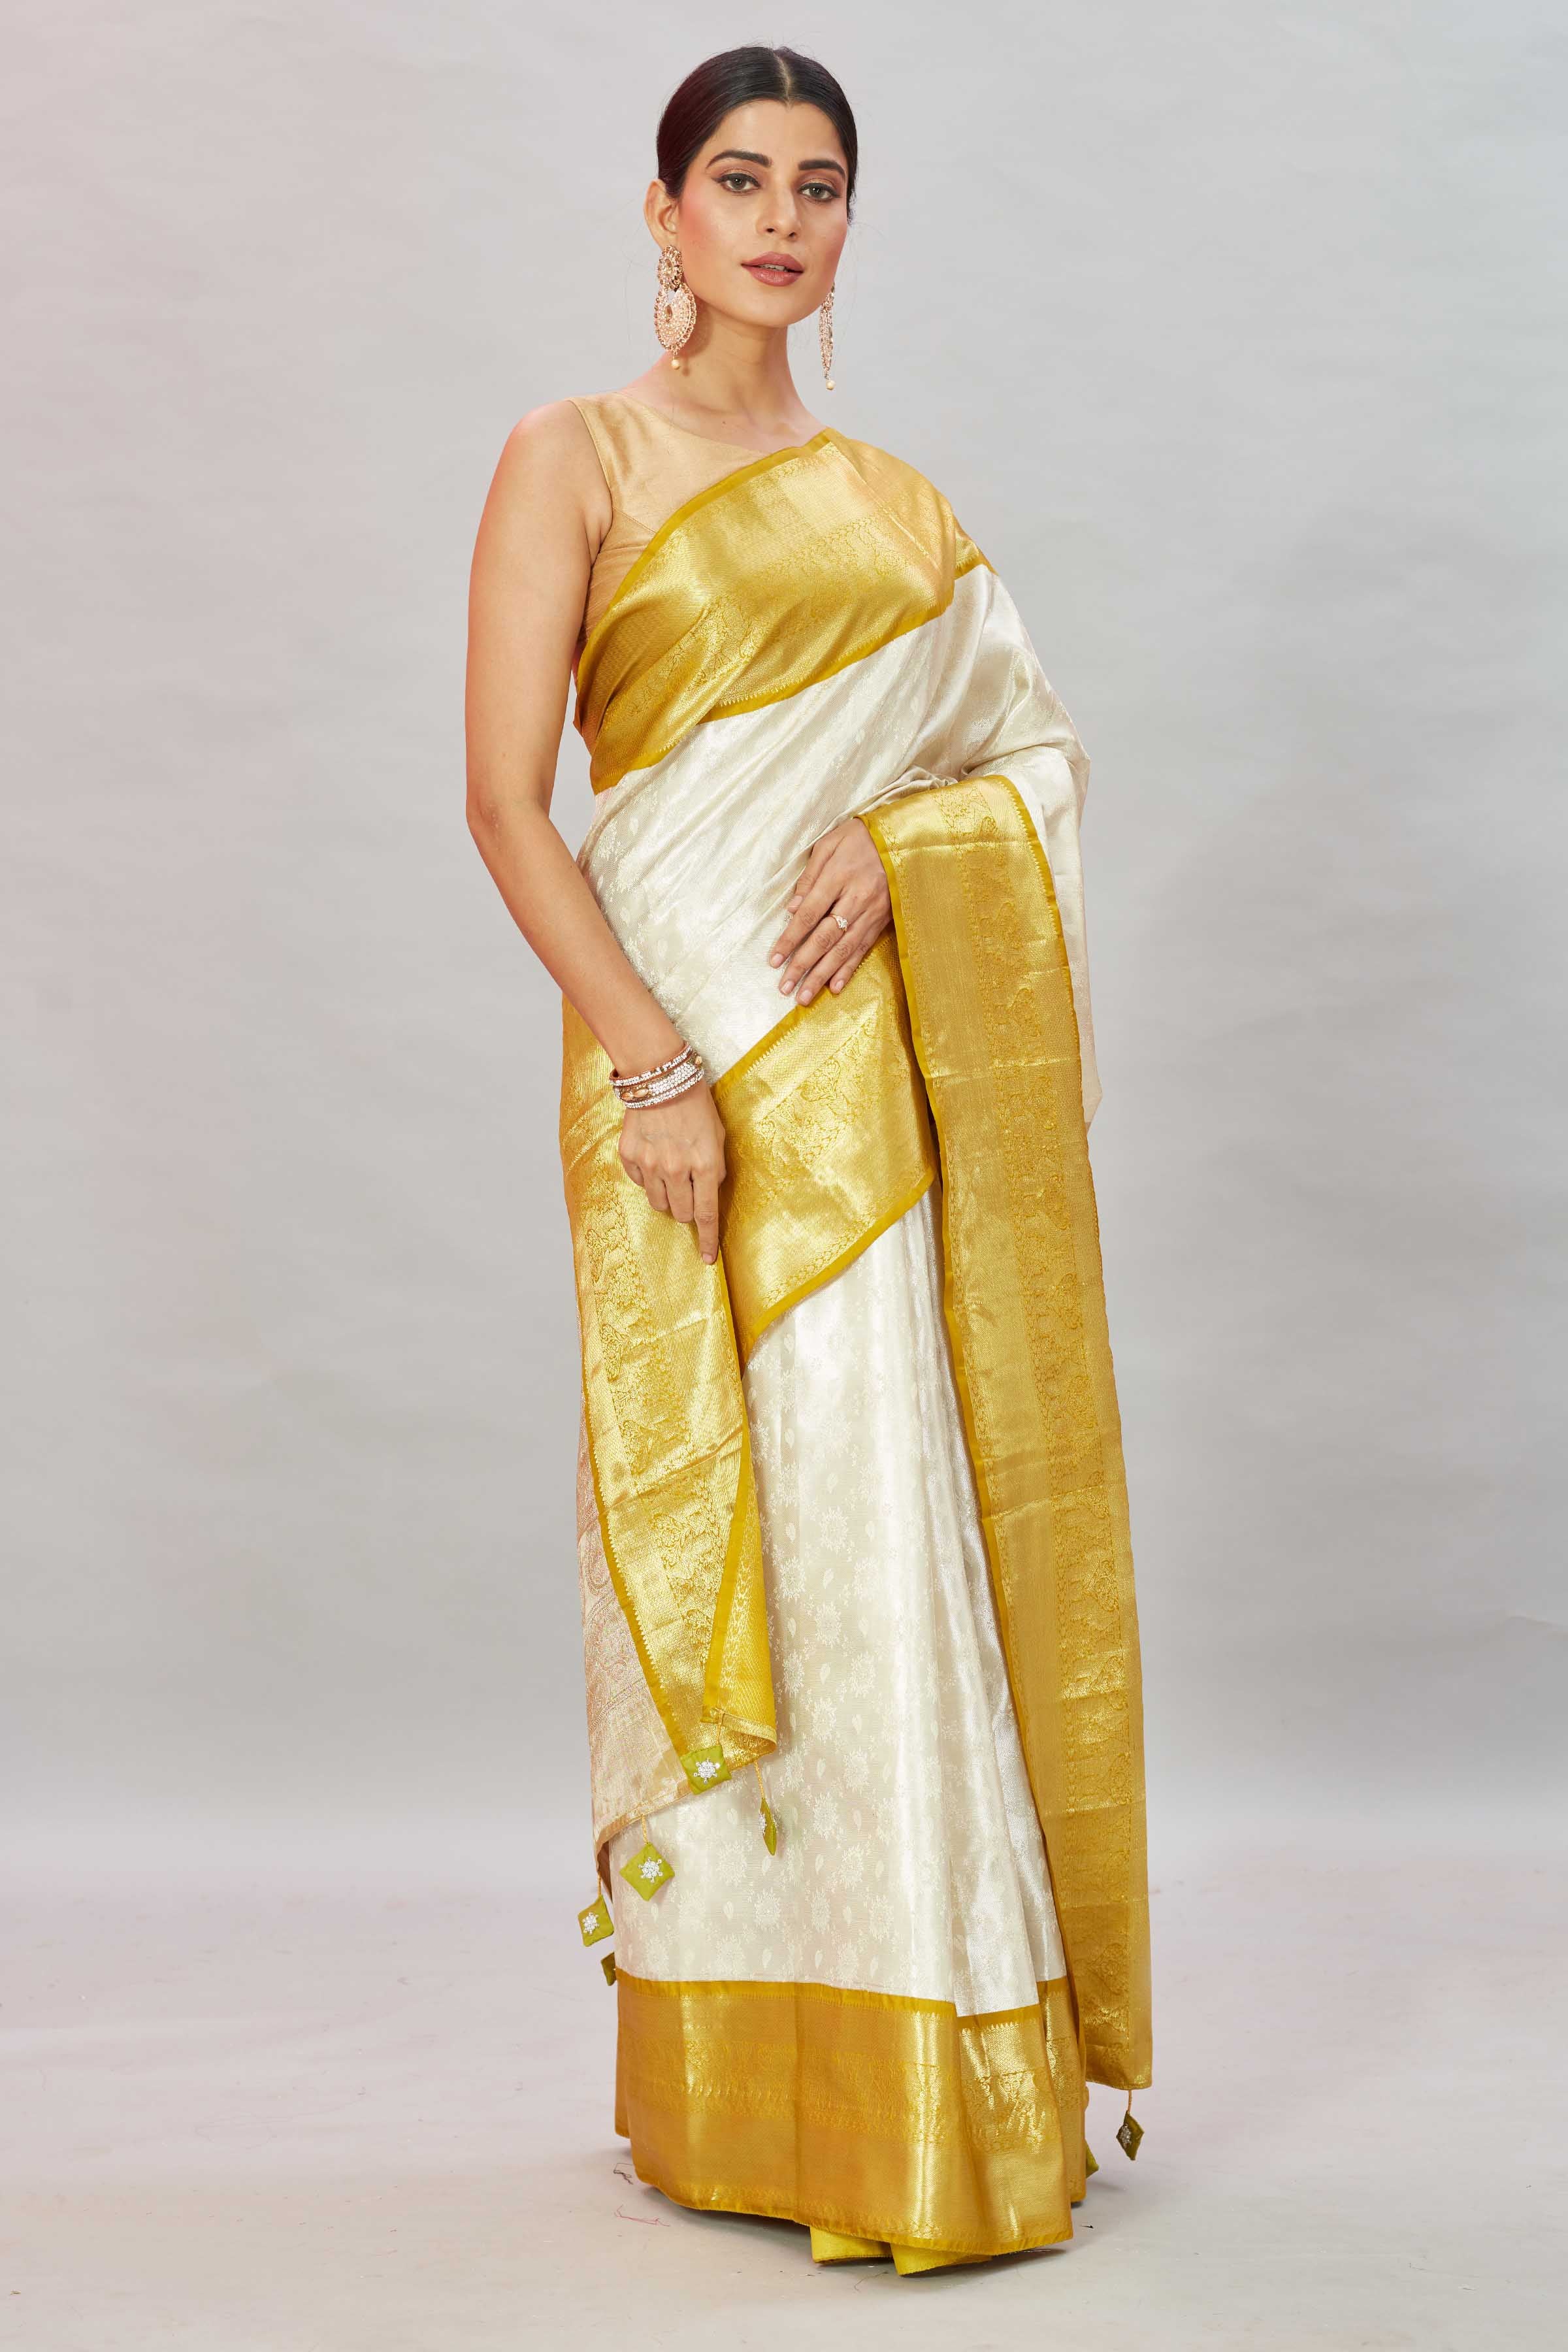 Shop cream Kanjivaram silk sari online in USA with golden zari border. Look your best on festive occasions in latest designer sarees, pure silk sarees, Kanjivaram silk saris, handwoven saris, tussar silk sarees, embroidered saris from Pure Elegance Indian clothing store in USA.-side